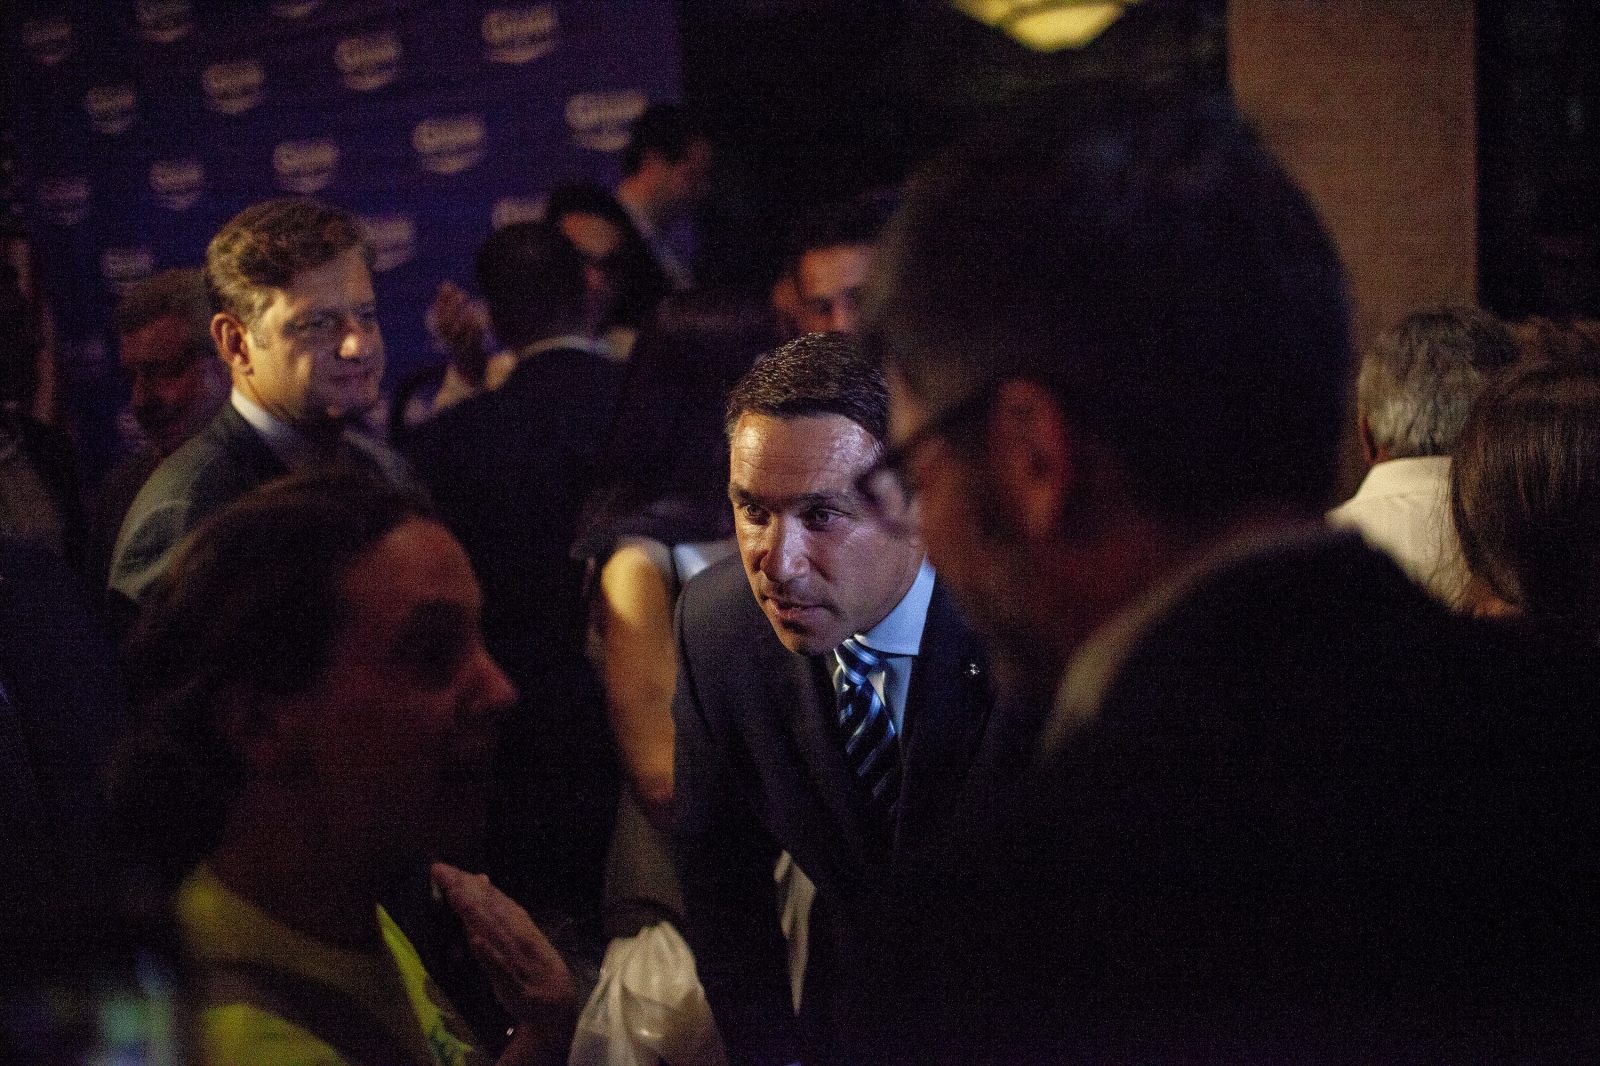  Tales from Trumpland, Republican Michael Grimm, after he conceded to Dan Donovan at the Hilton Garden Inn on Staten Island during the Republican congressional primary, came down to greet his supporters. Donovan had 64.2% of the votes vs. Grimm's 35.8%. Michael Gerard Grimm (born February 7, 1970) is an American businessman, convicted felon, retired Marine and politician who represented New York in the United States Congress from 2011 to 2015. Grimm represented New York's 13th congressional district during his first term, after which he represented New York's 11th congressional district. Both districts consisted of Staten Island and parts of Brooklyn. Grimm is a member of the Republican Party, and during his time in office was the only Republican to represent a significant portion of New York City. On July 17, 2015, Grimm was sentenced to eight months in prison for tax evasion. Staten Island, NY June 26, 2018 (Kevin C. Downs/Agence Cosmos) 